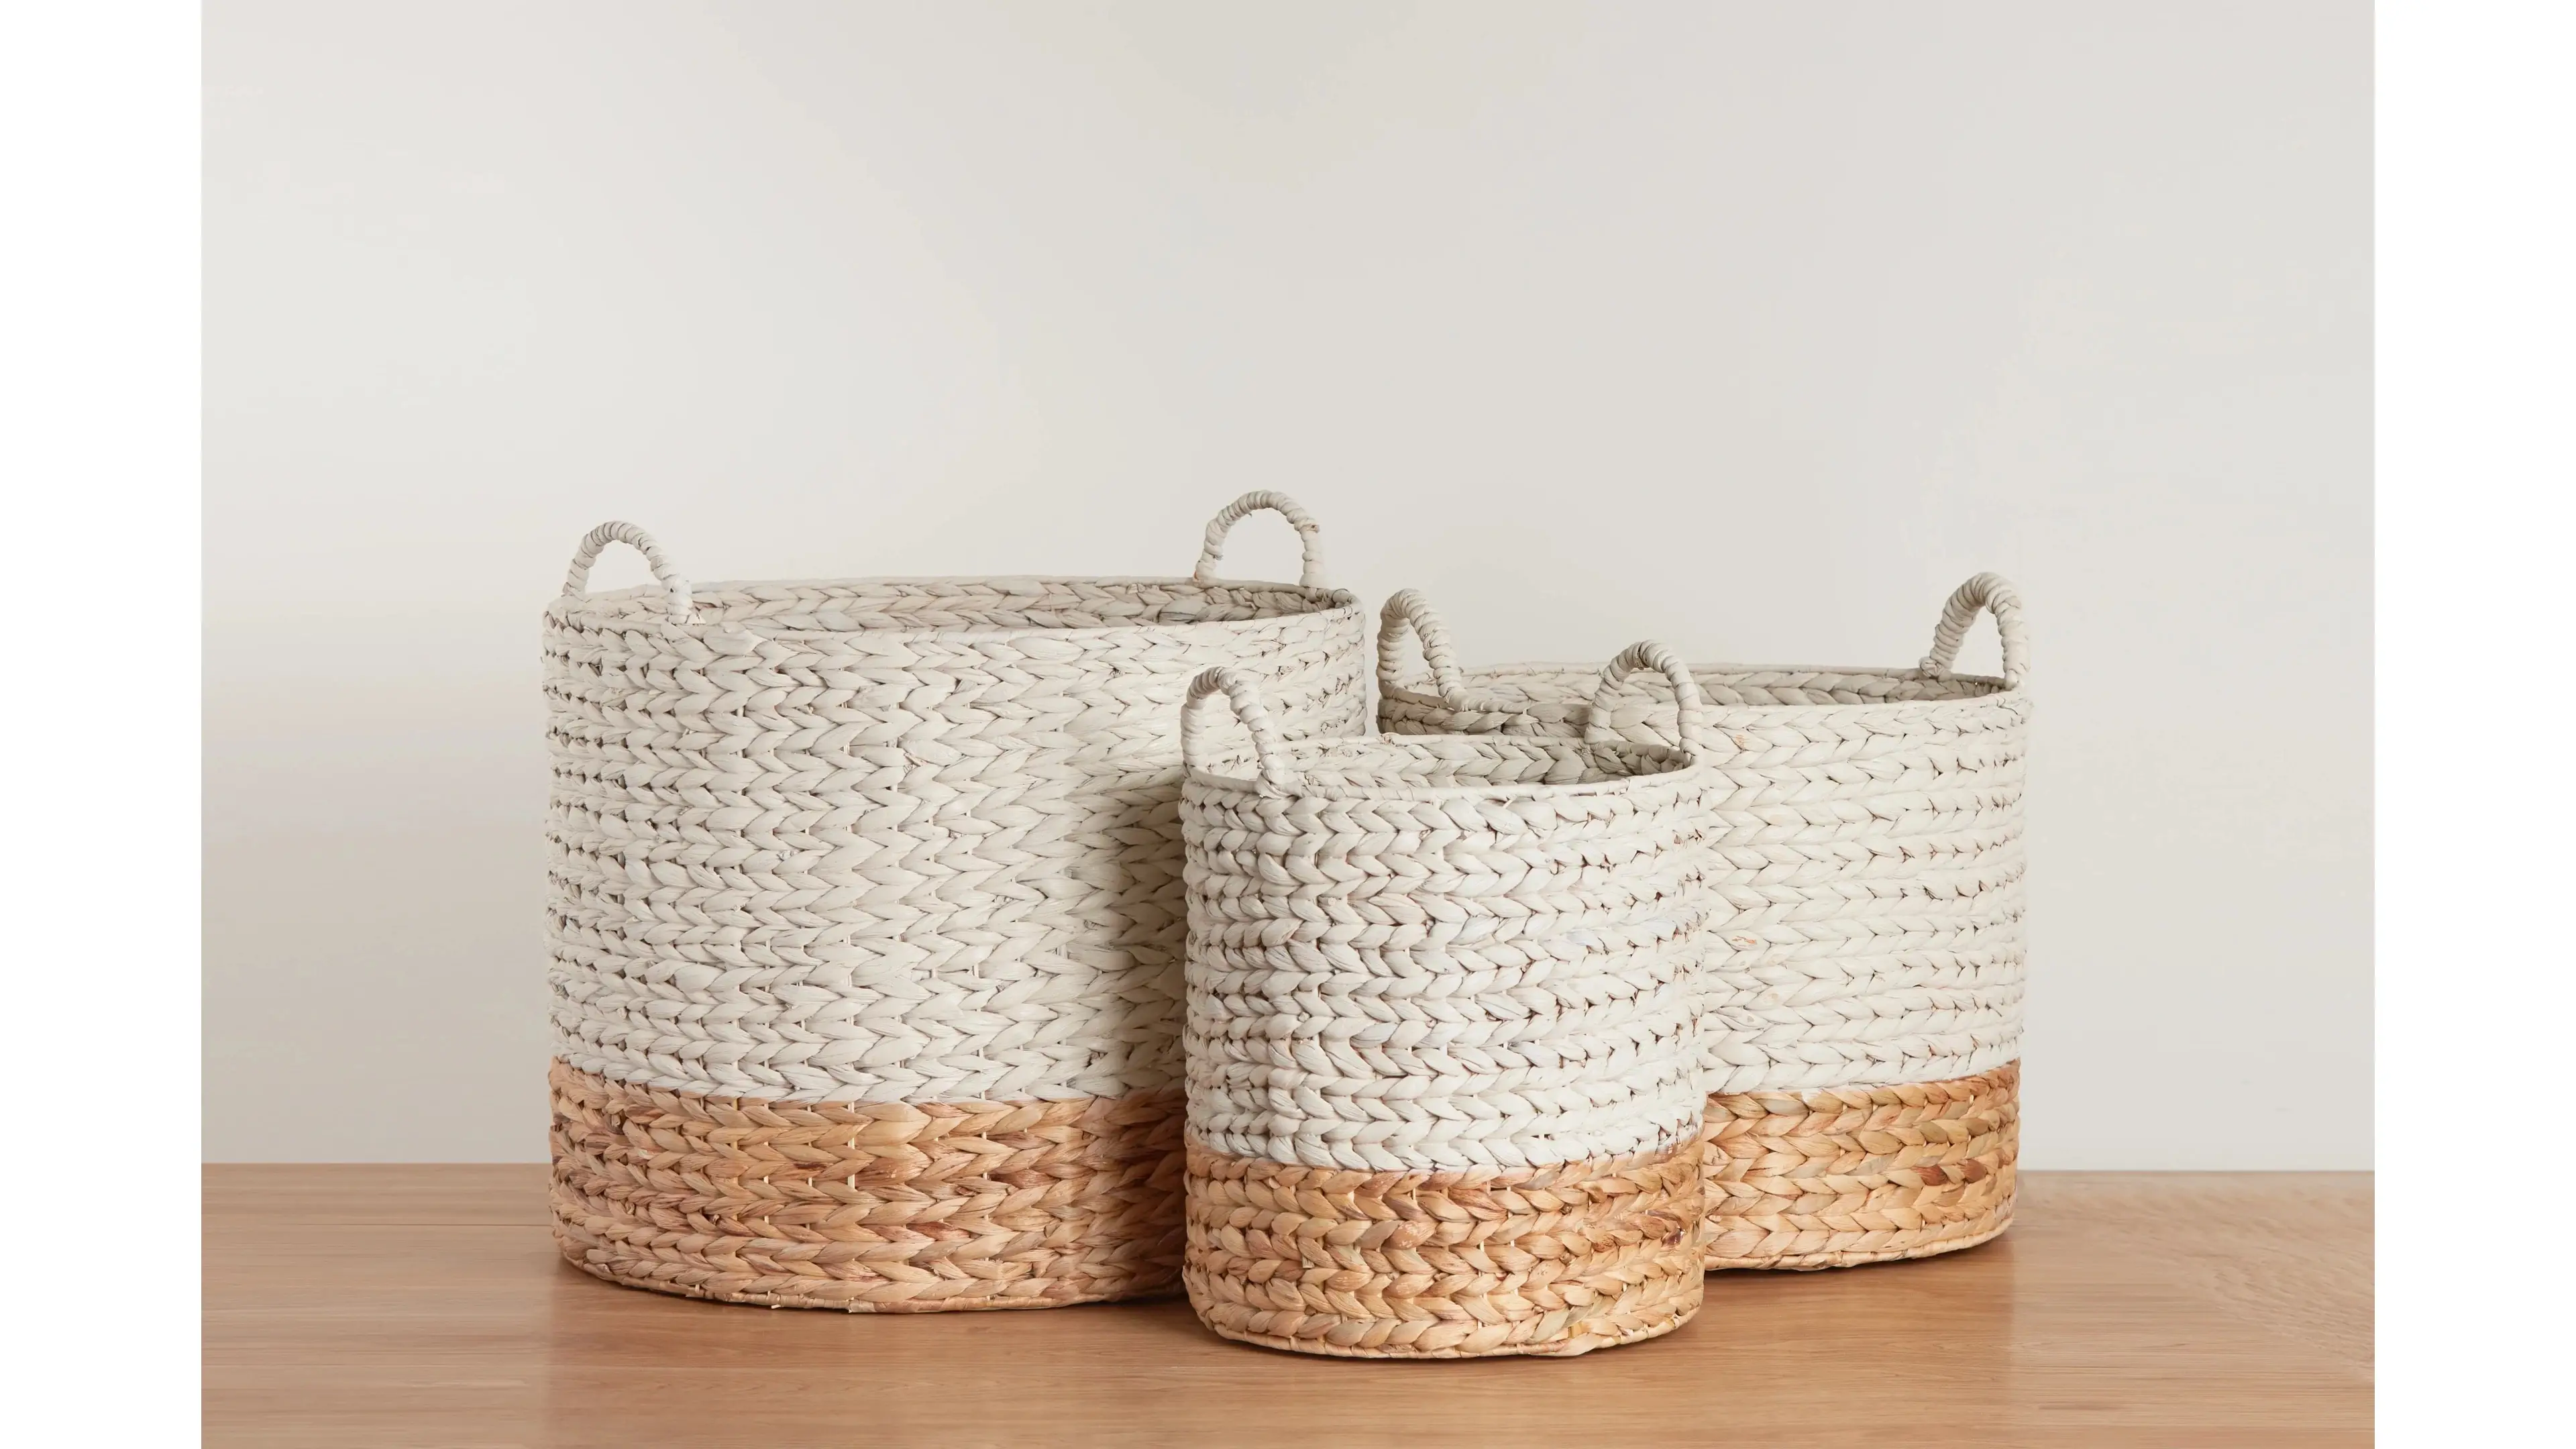 Functional Decor with Baskets and Ottomans